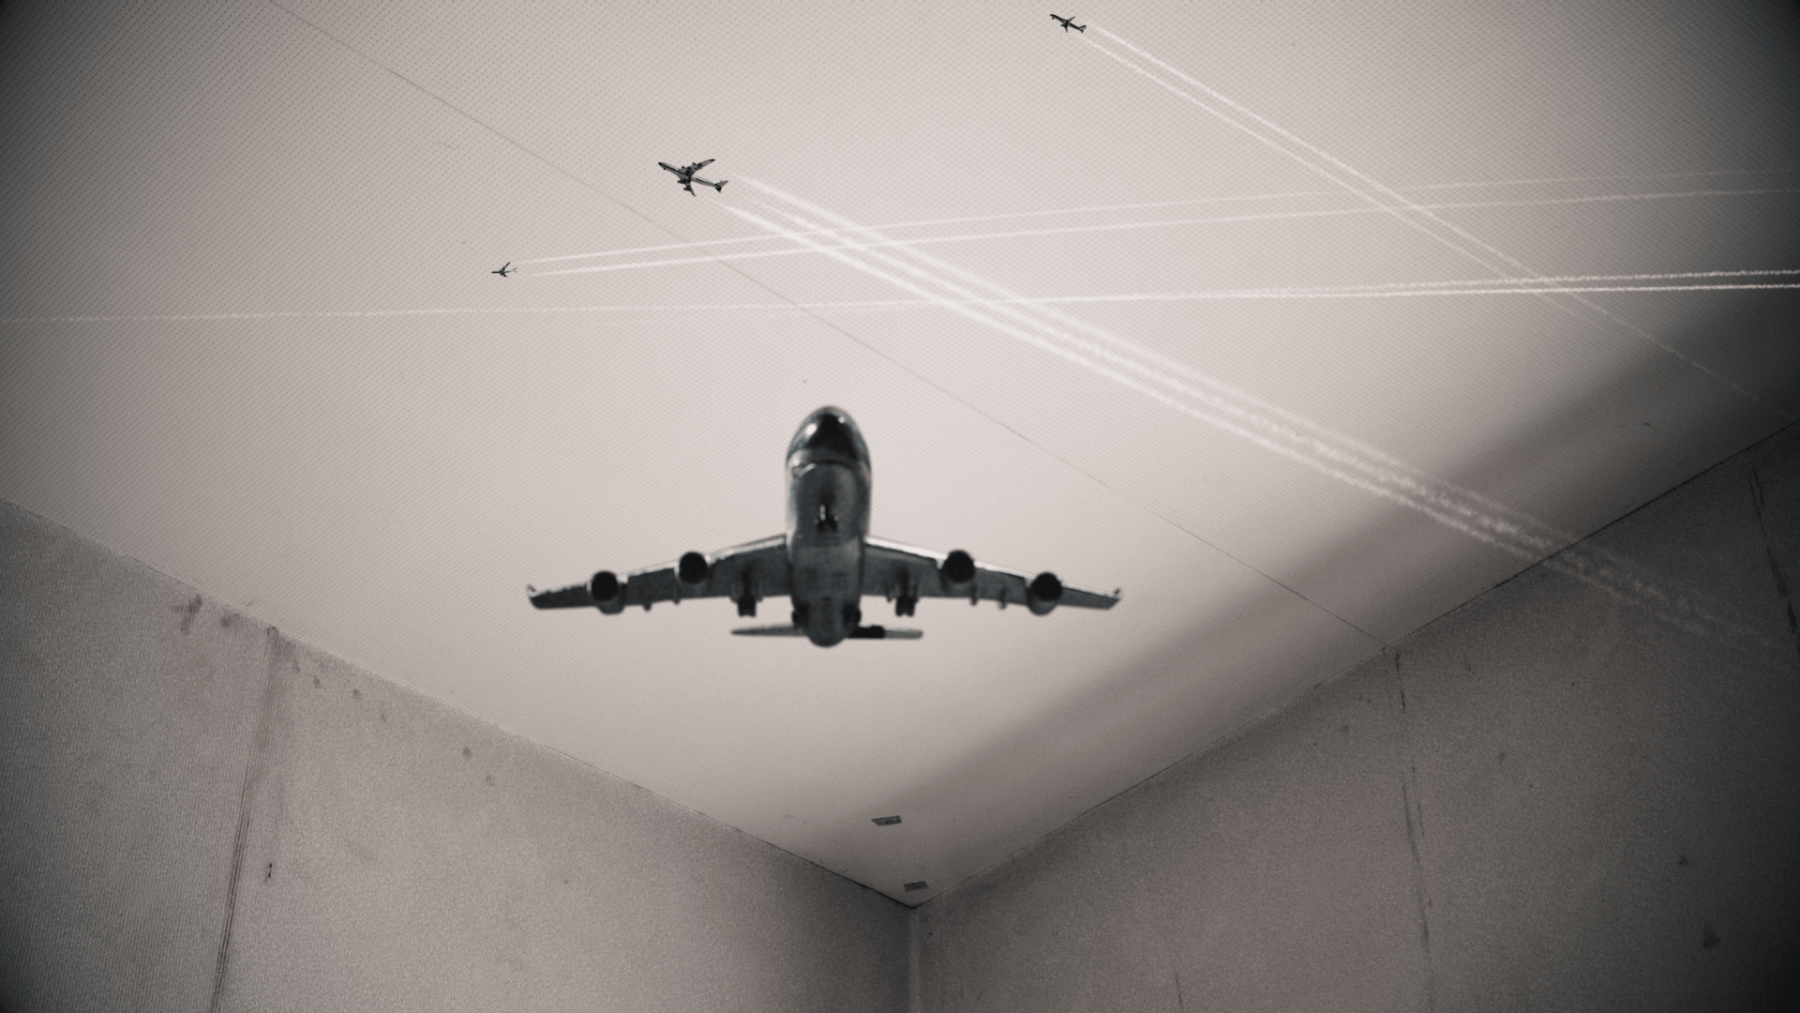 small airplanes are flying inside a concrete room, leaving behinds trails of smoke